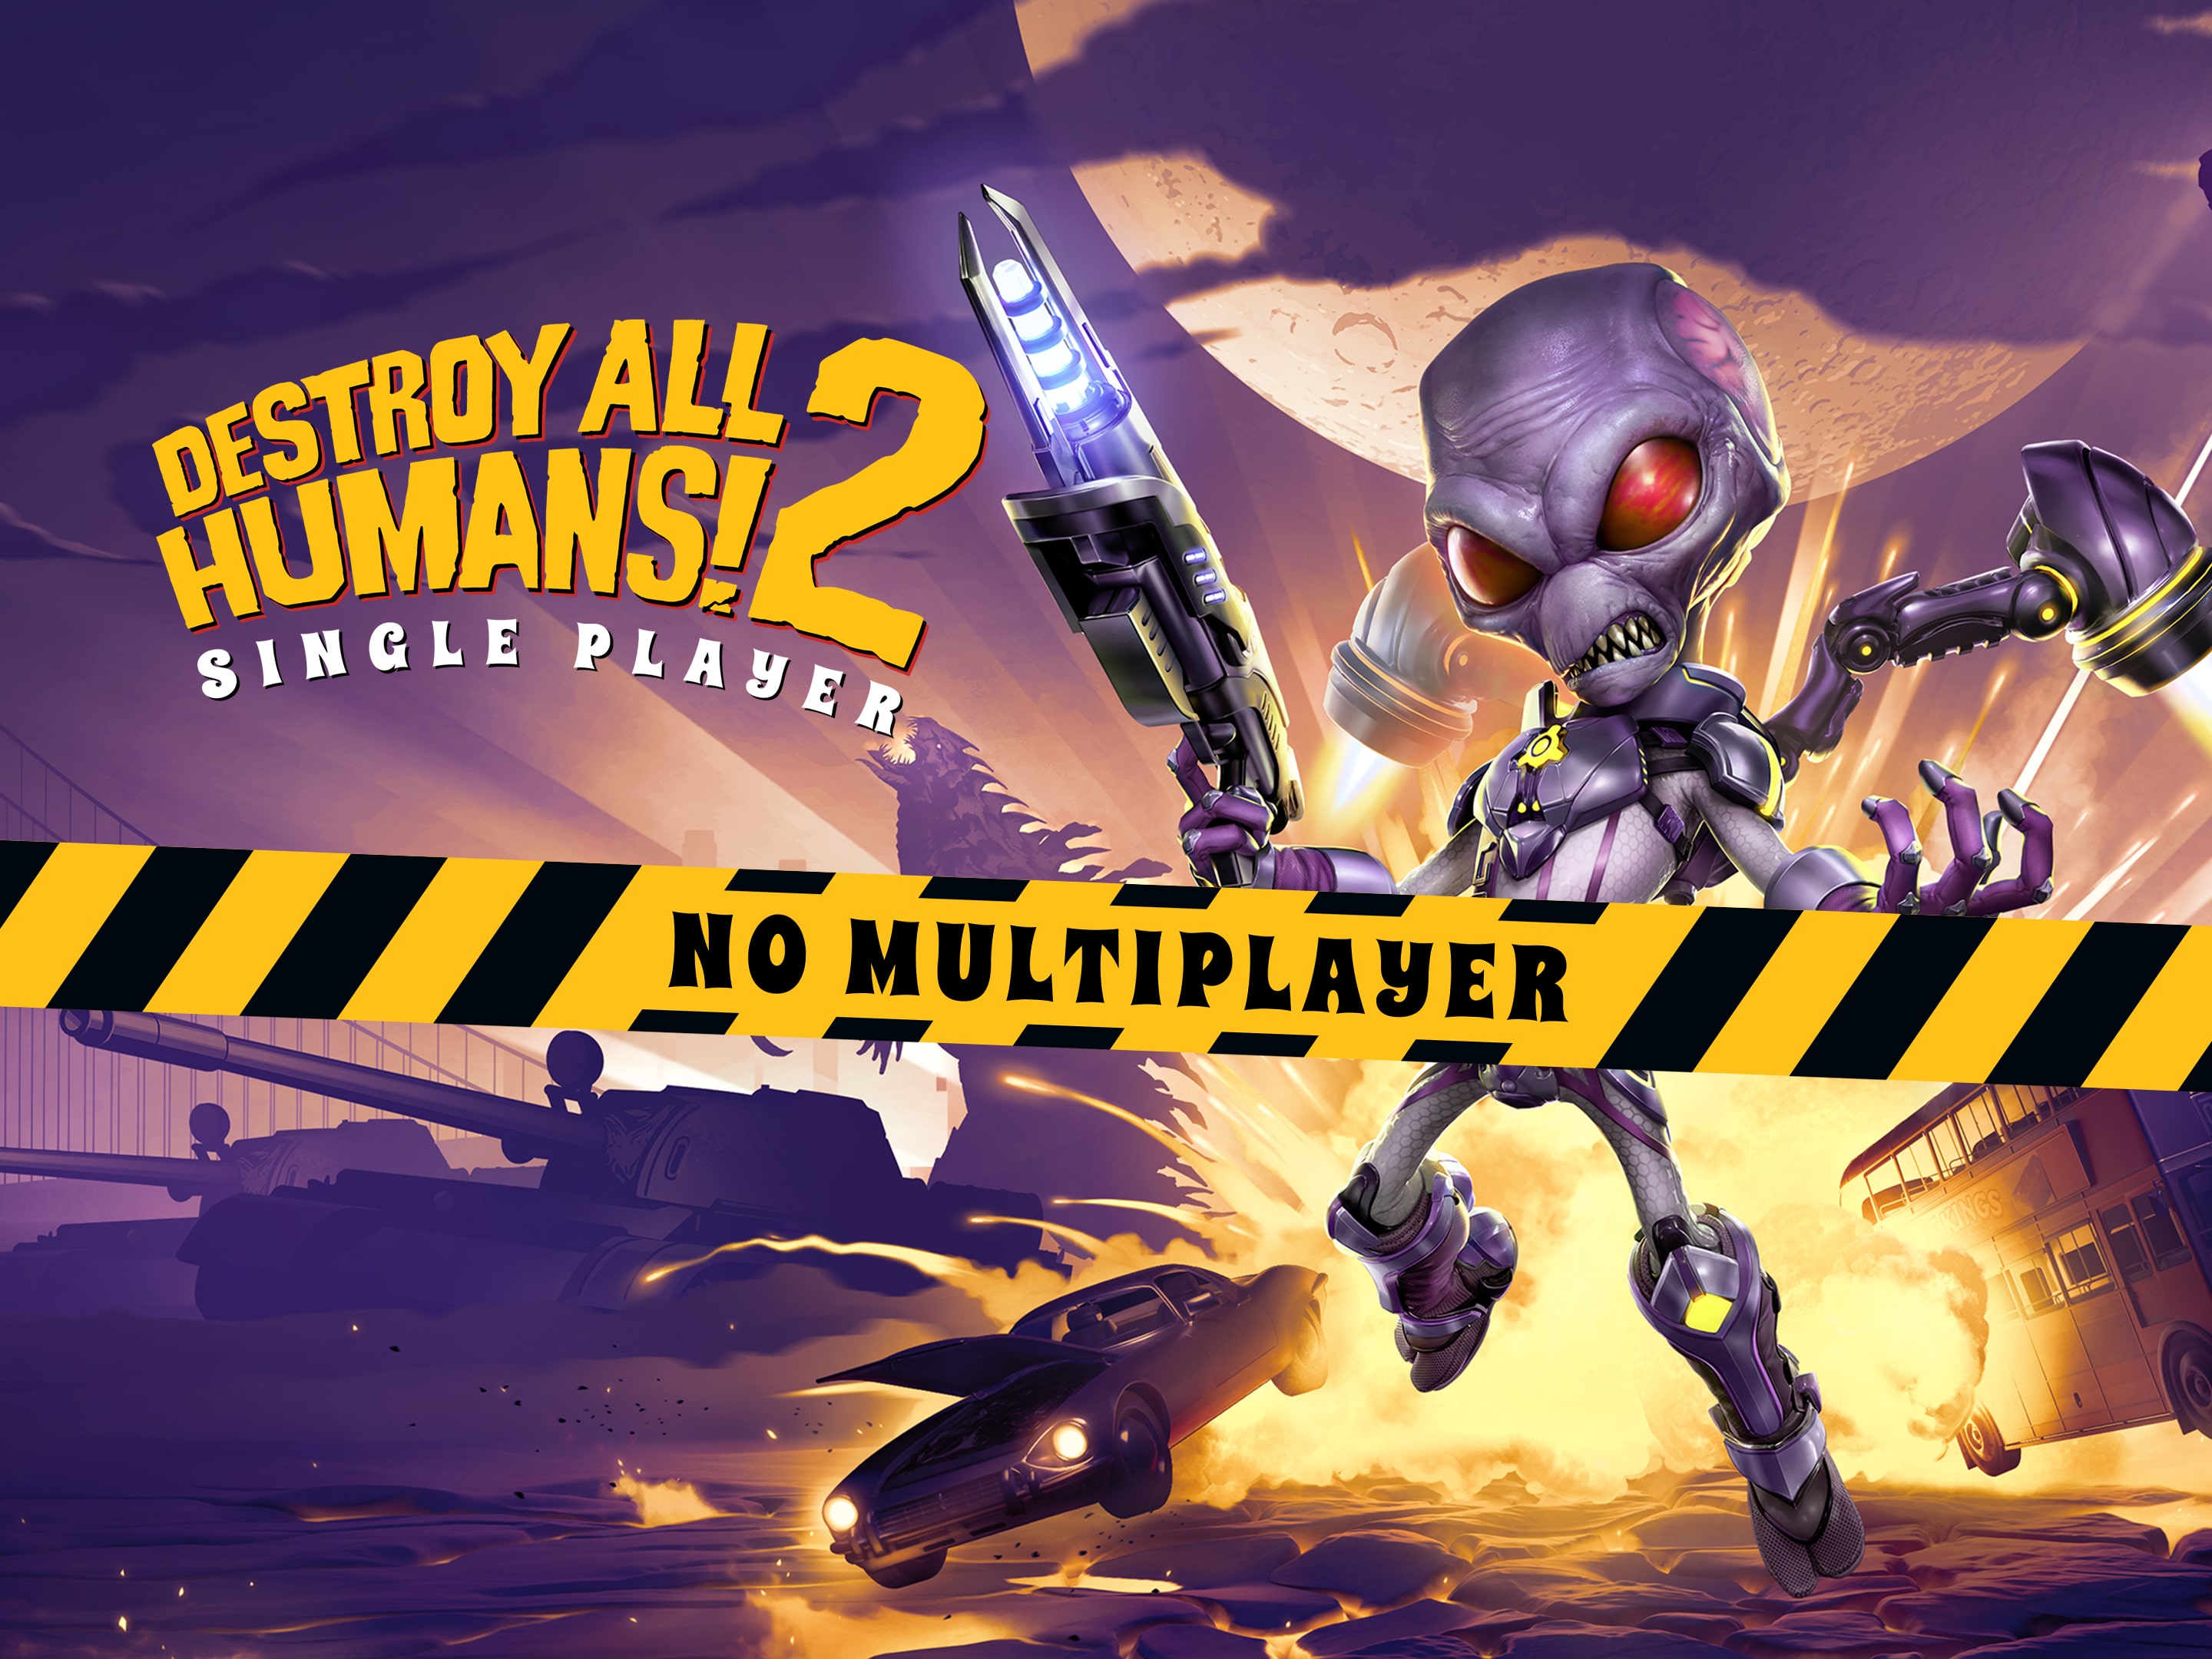 Jogo PS4 Destroy all Humans 2: Reprobed - Single Player